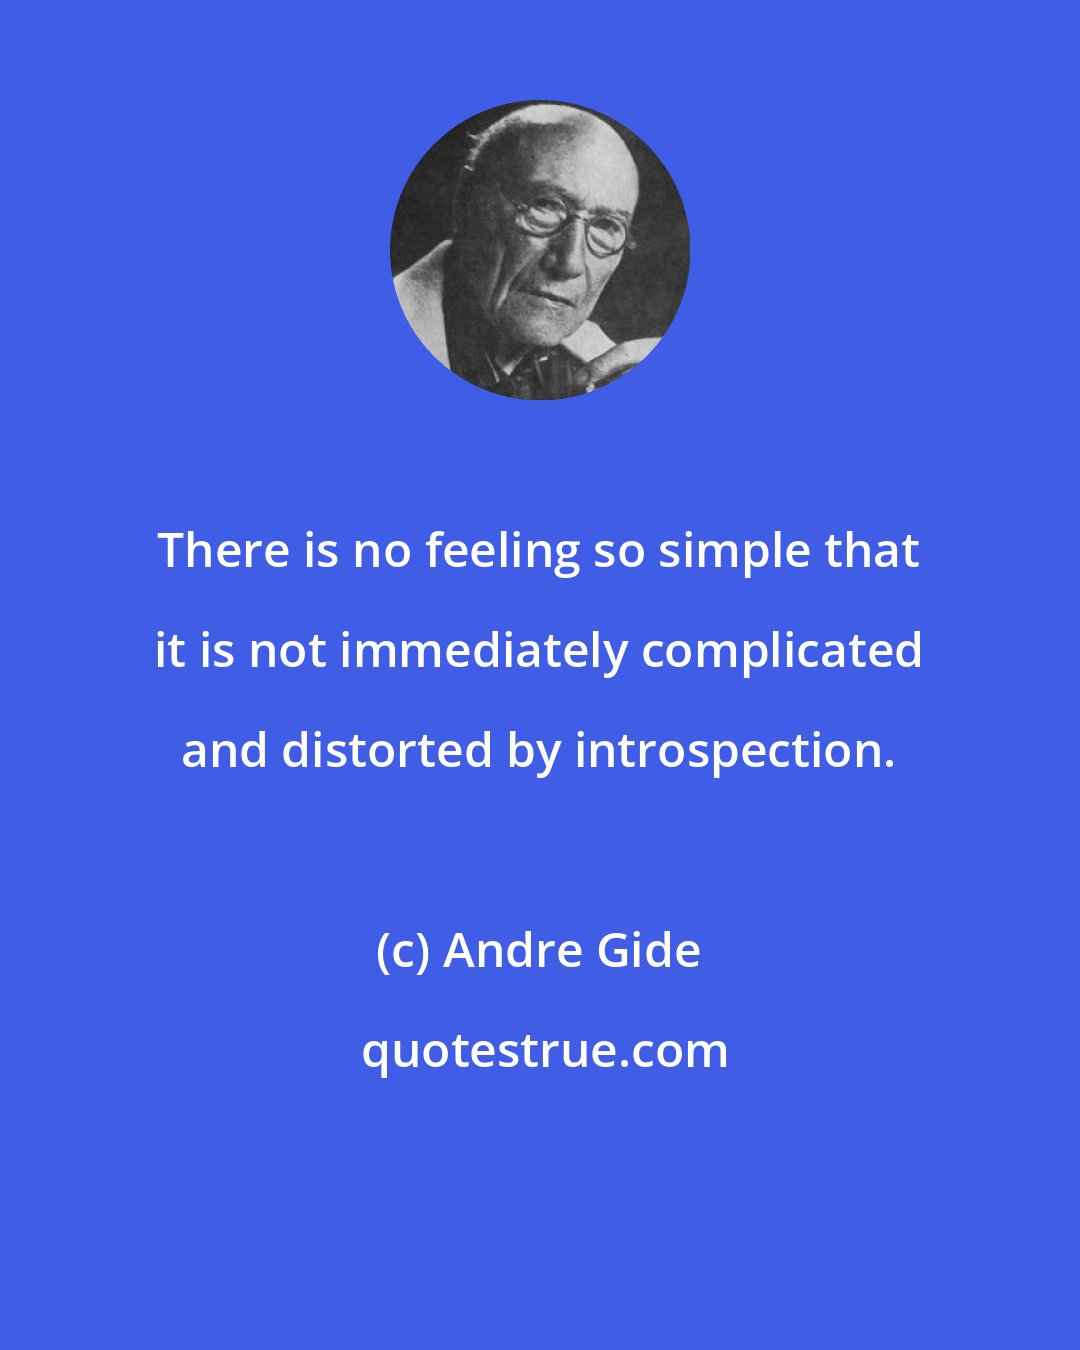 Andre Gide: There is no feeling so simple that it is not immediately complicated and distorted by introspection.